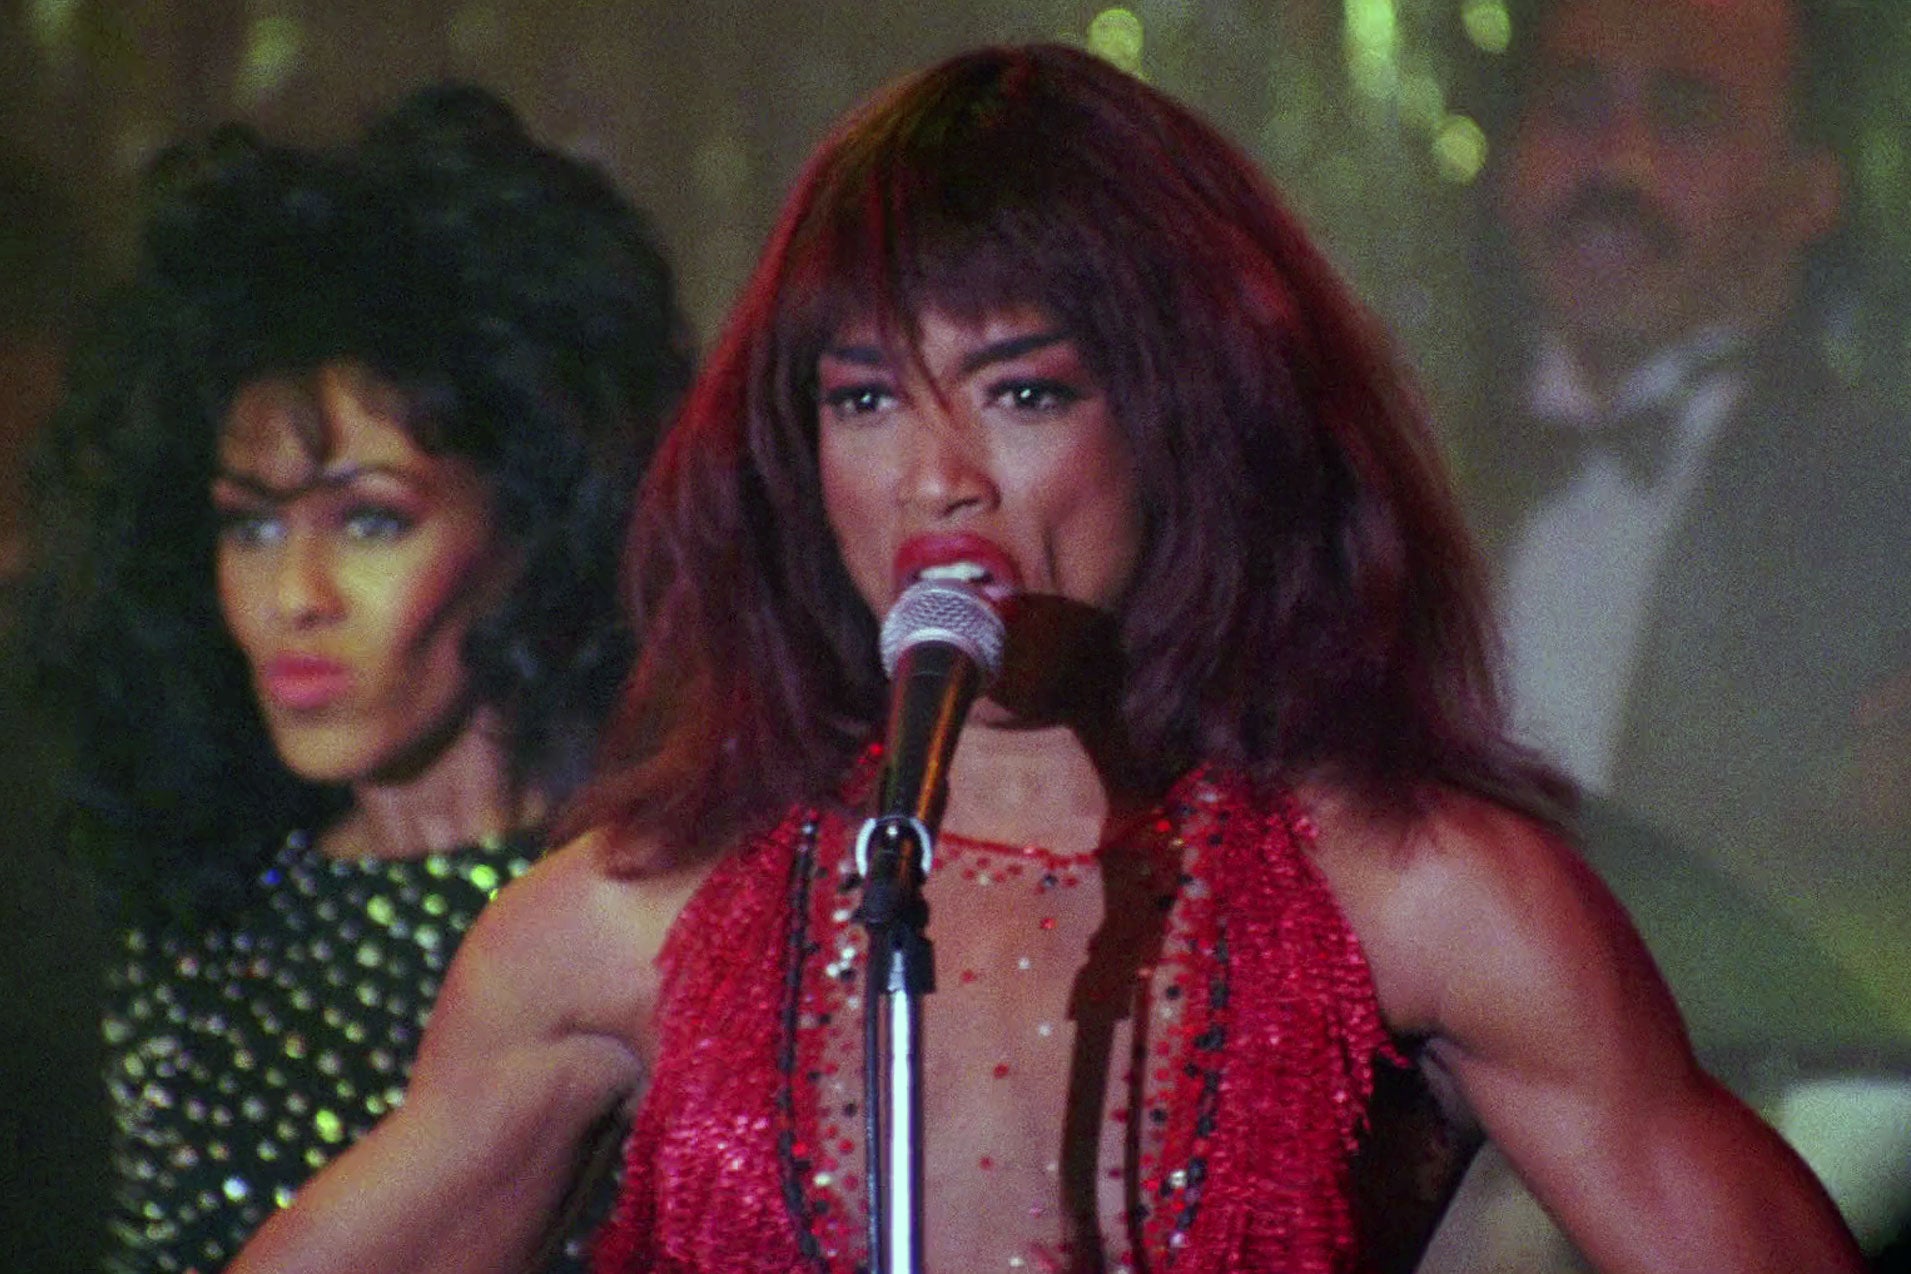 Angela Bassett stands on-stage with her arms outstretched, mid song,  dressed as Tina Turner with long hair and a sparkly red costume on and a background singer behind her.